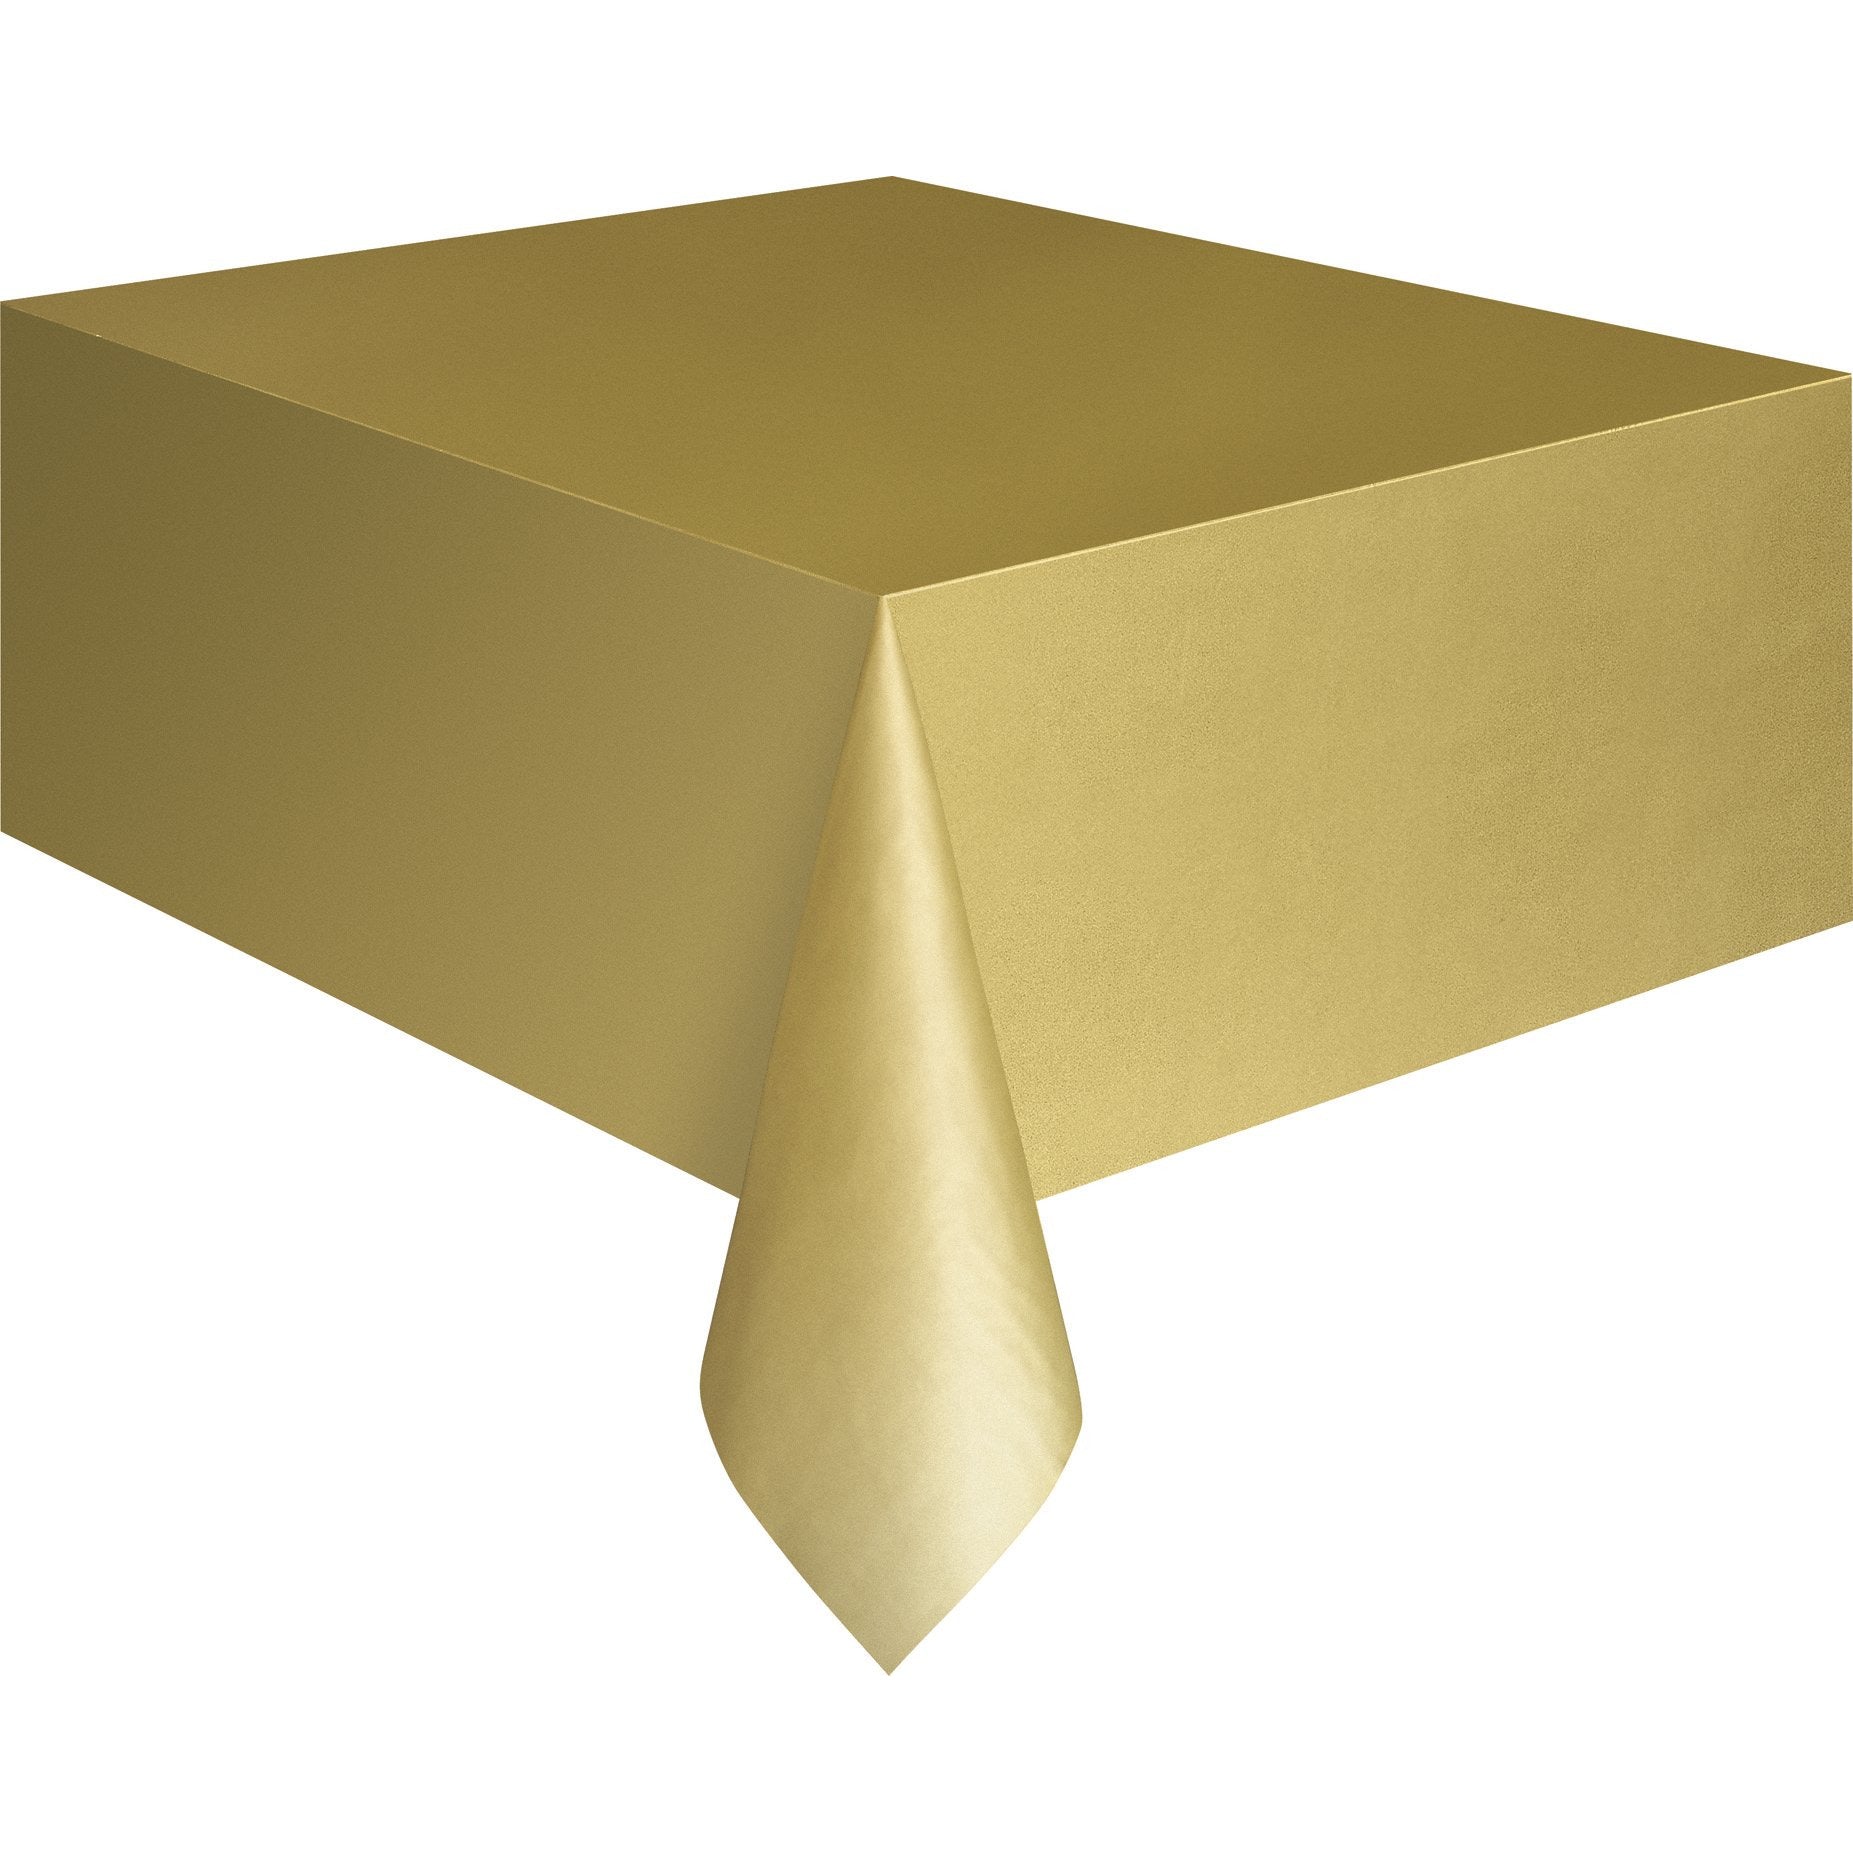 Plastic Tablecover - Gold - Dollars and Sense